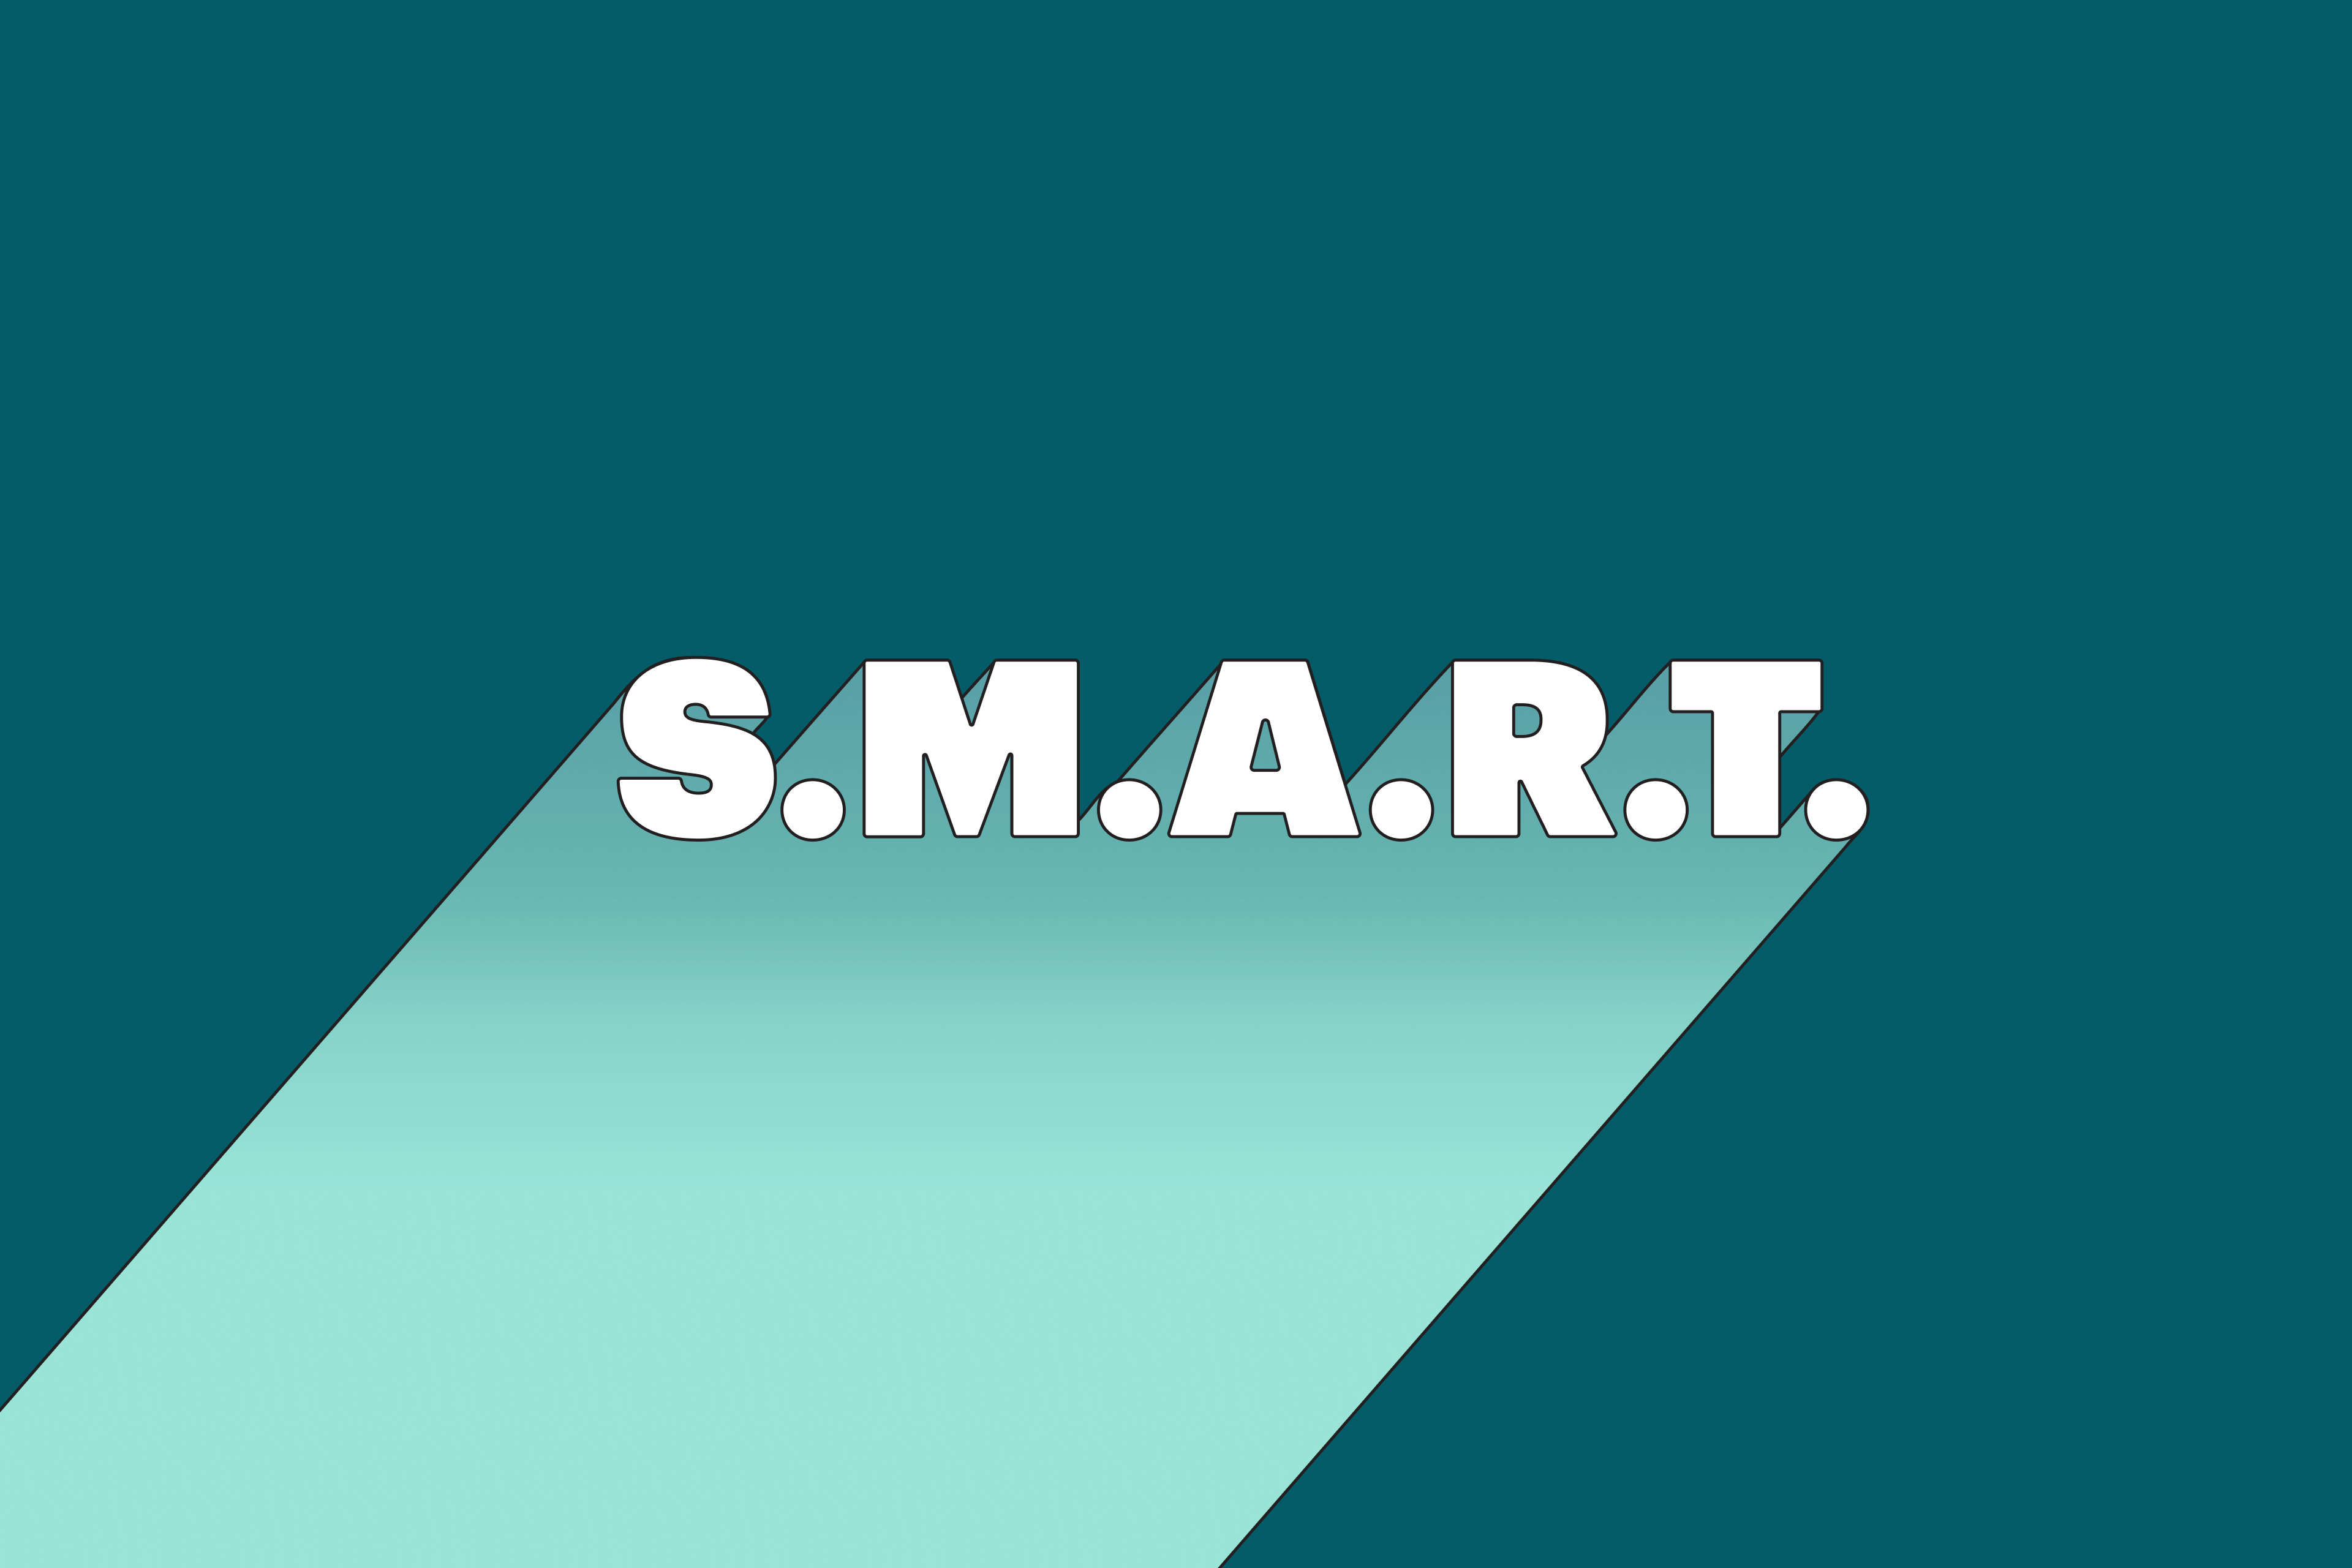 S.M.A.R.T. graphic